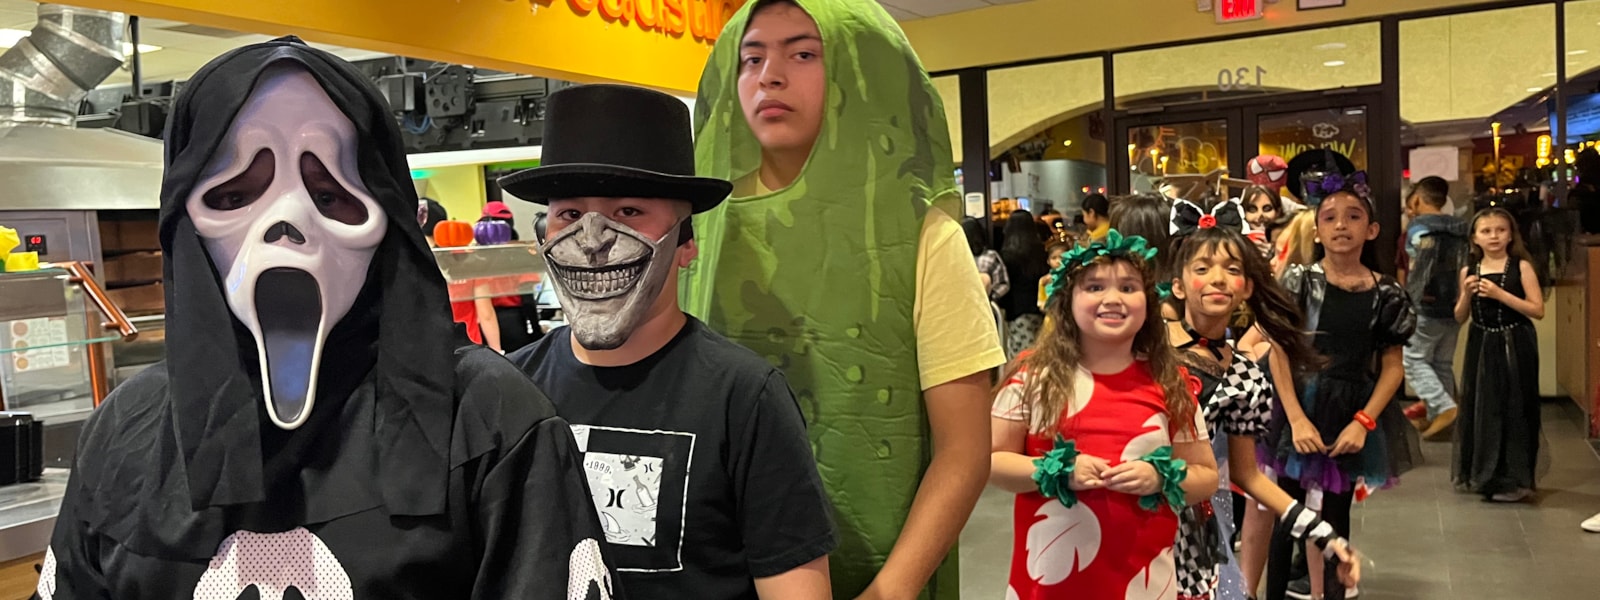 Students dressed up in costumes at Peter Piper Pizza Boo Bash